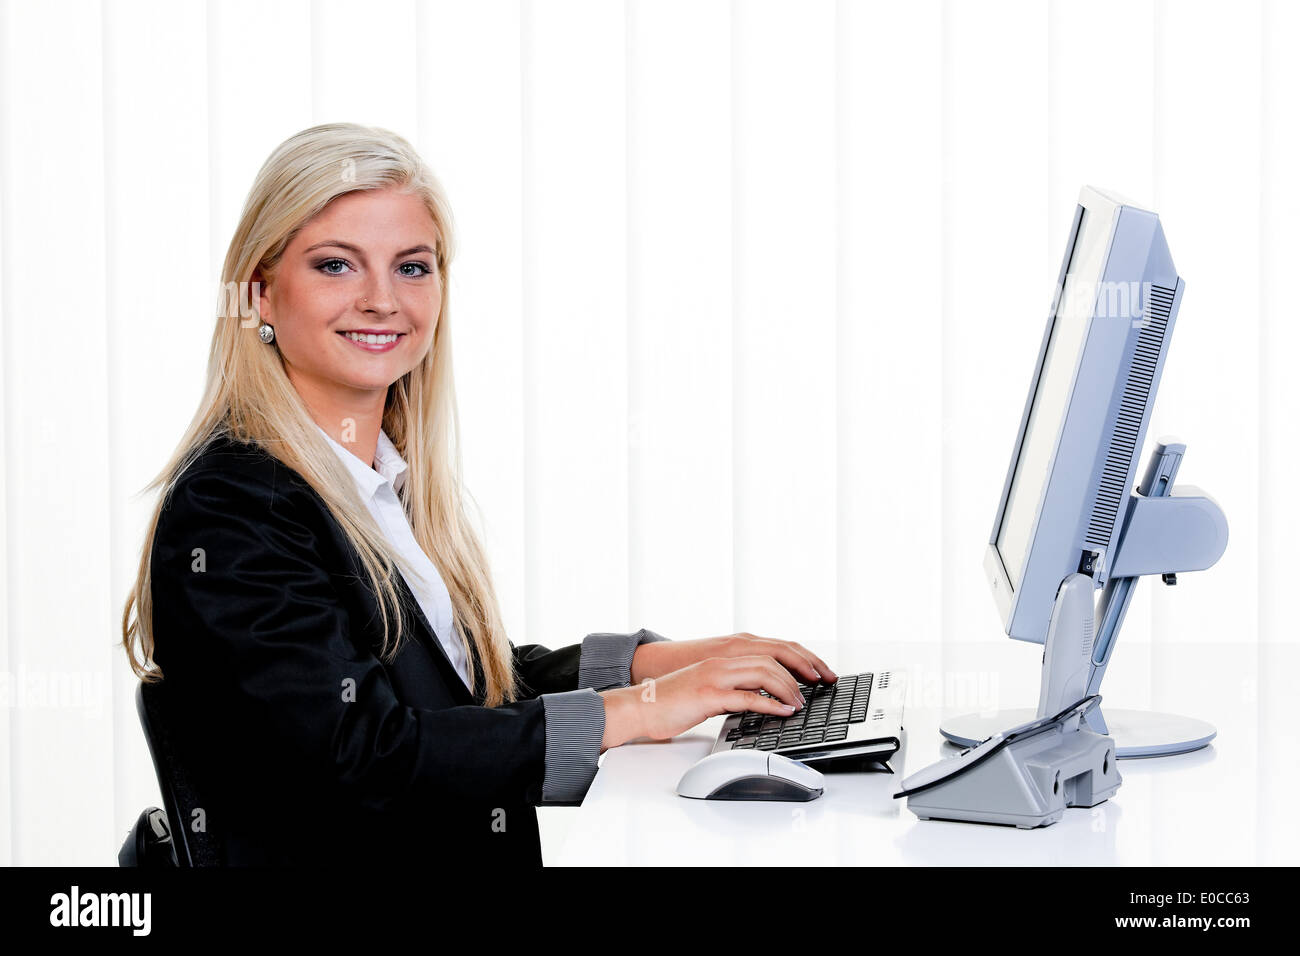 Young woman sits before a computer in the office., Junge Frau sitzt vor einem Computer im Buero. Stock Photo